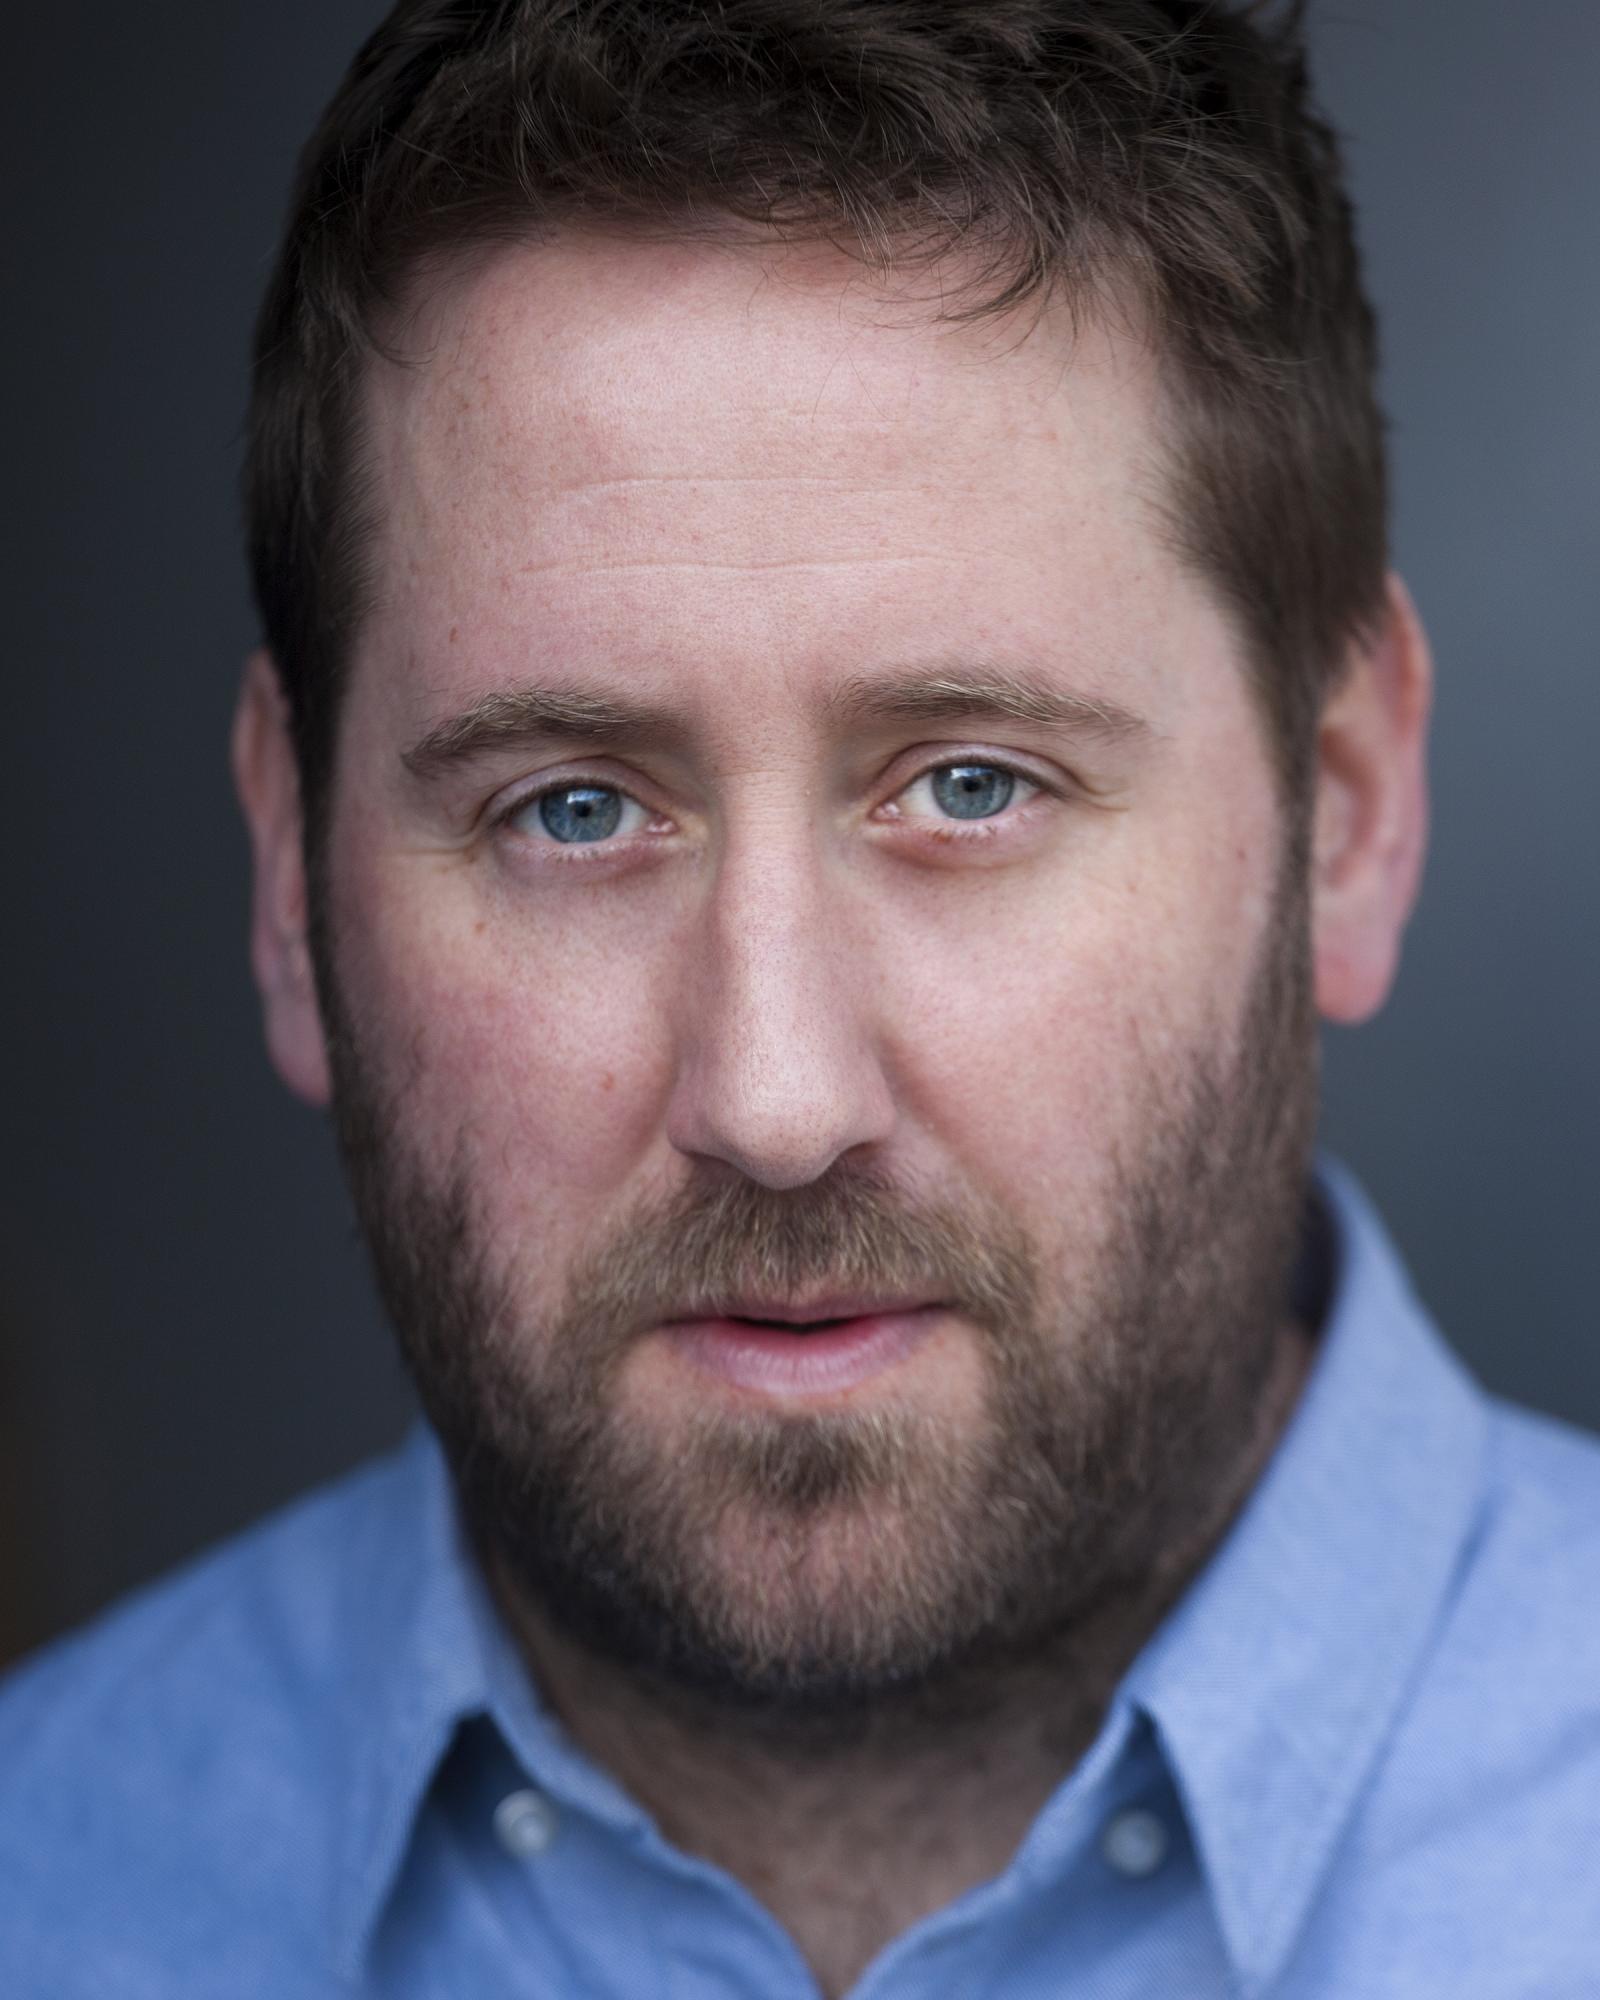 How tall is Jim Howick?